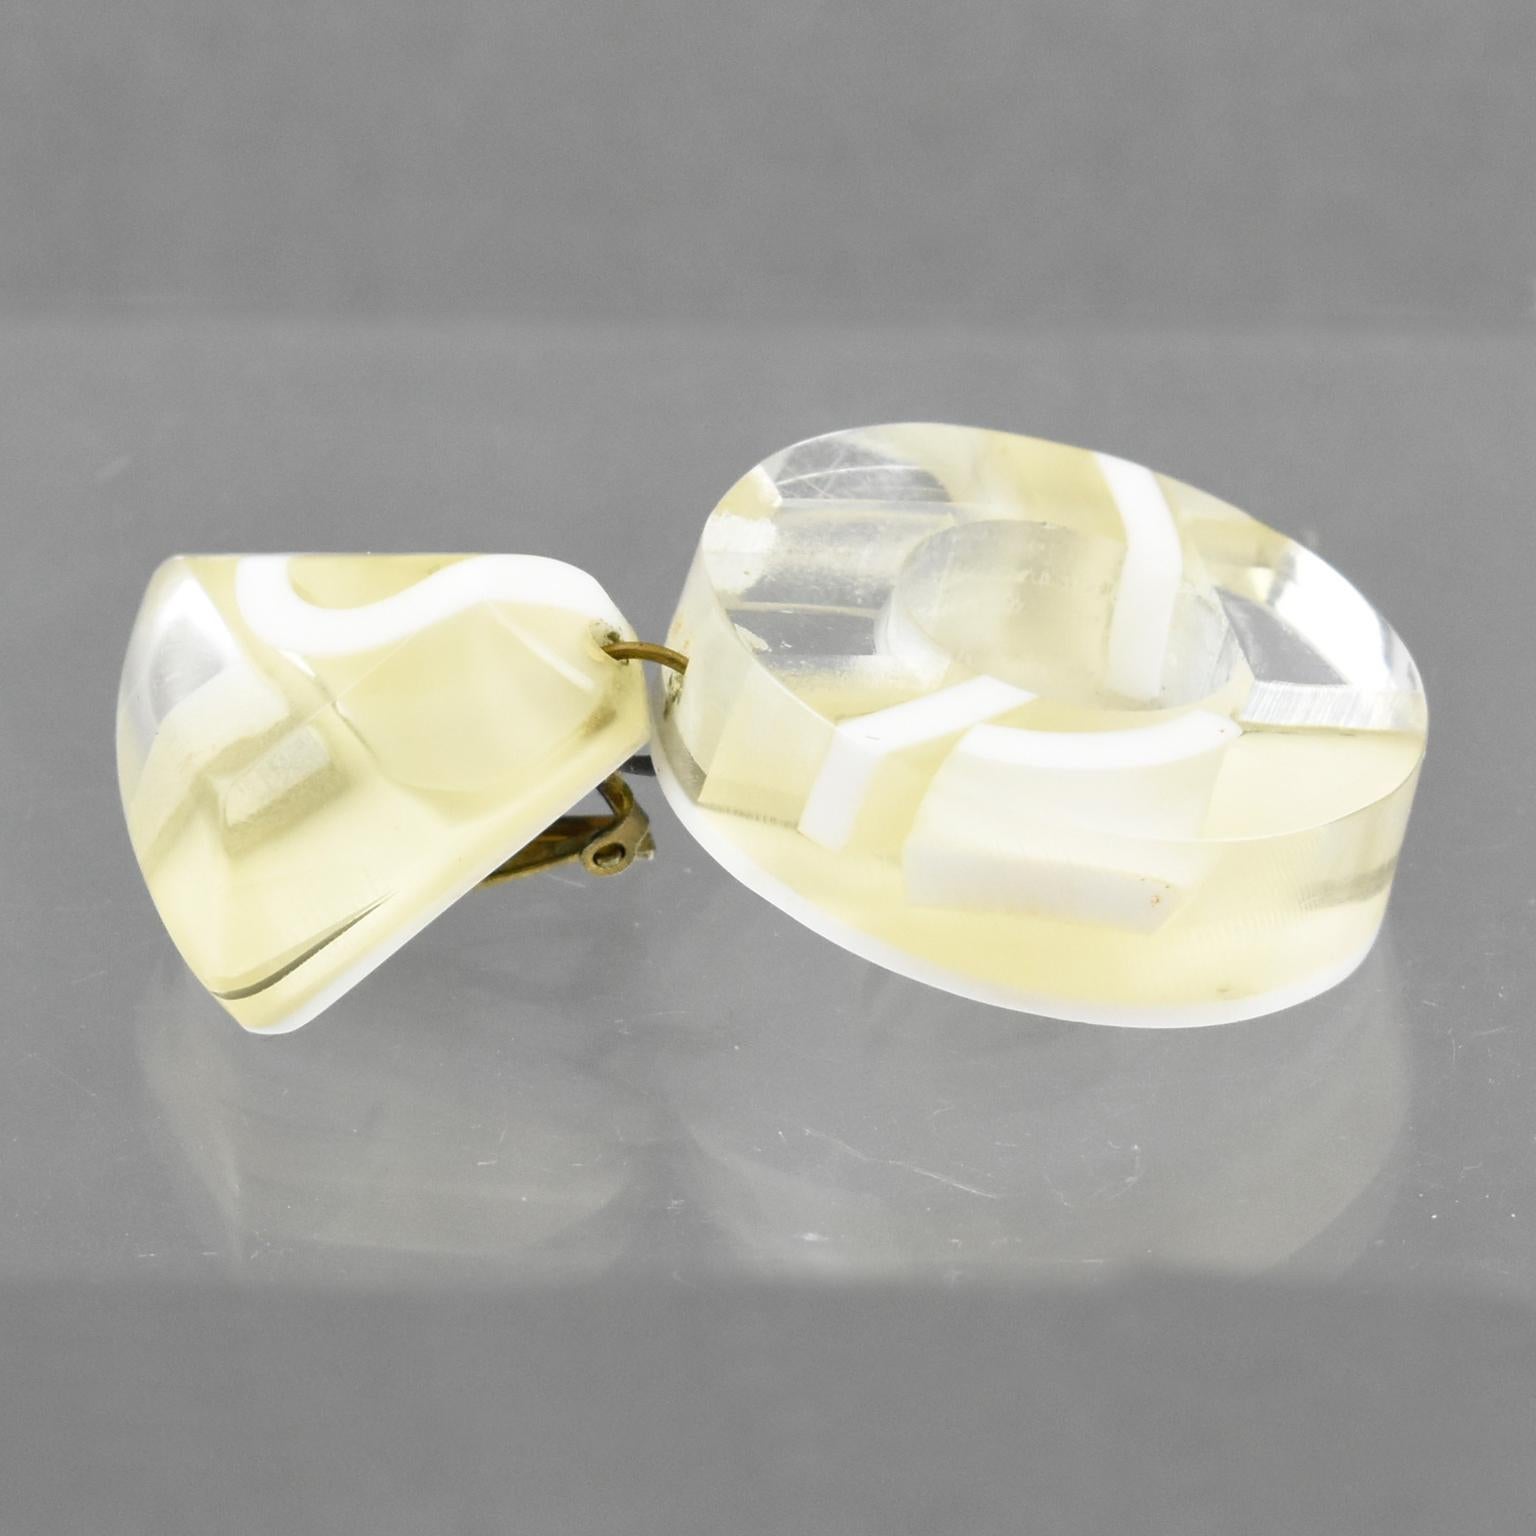 Kaso White Frosted and Mirror Effect Lucite Dangle Clip Earrings For Sale 2